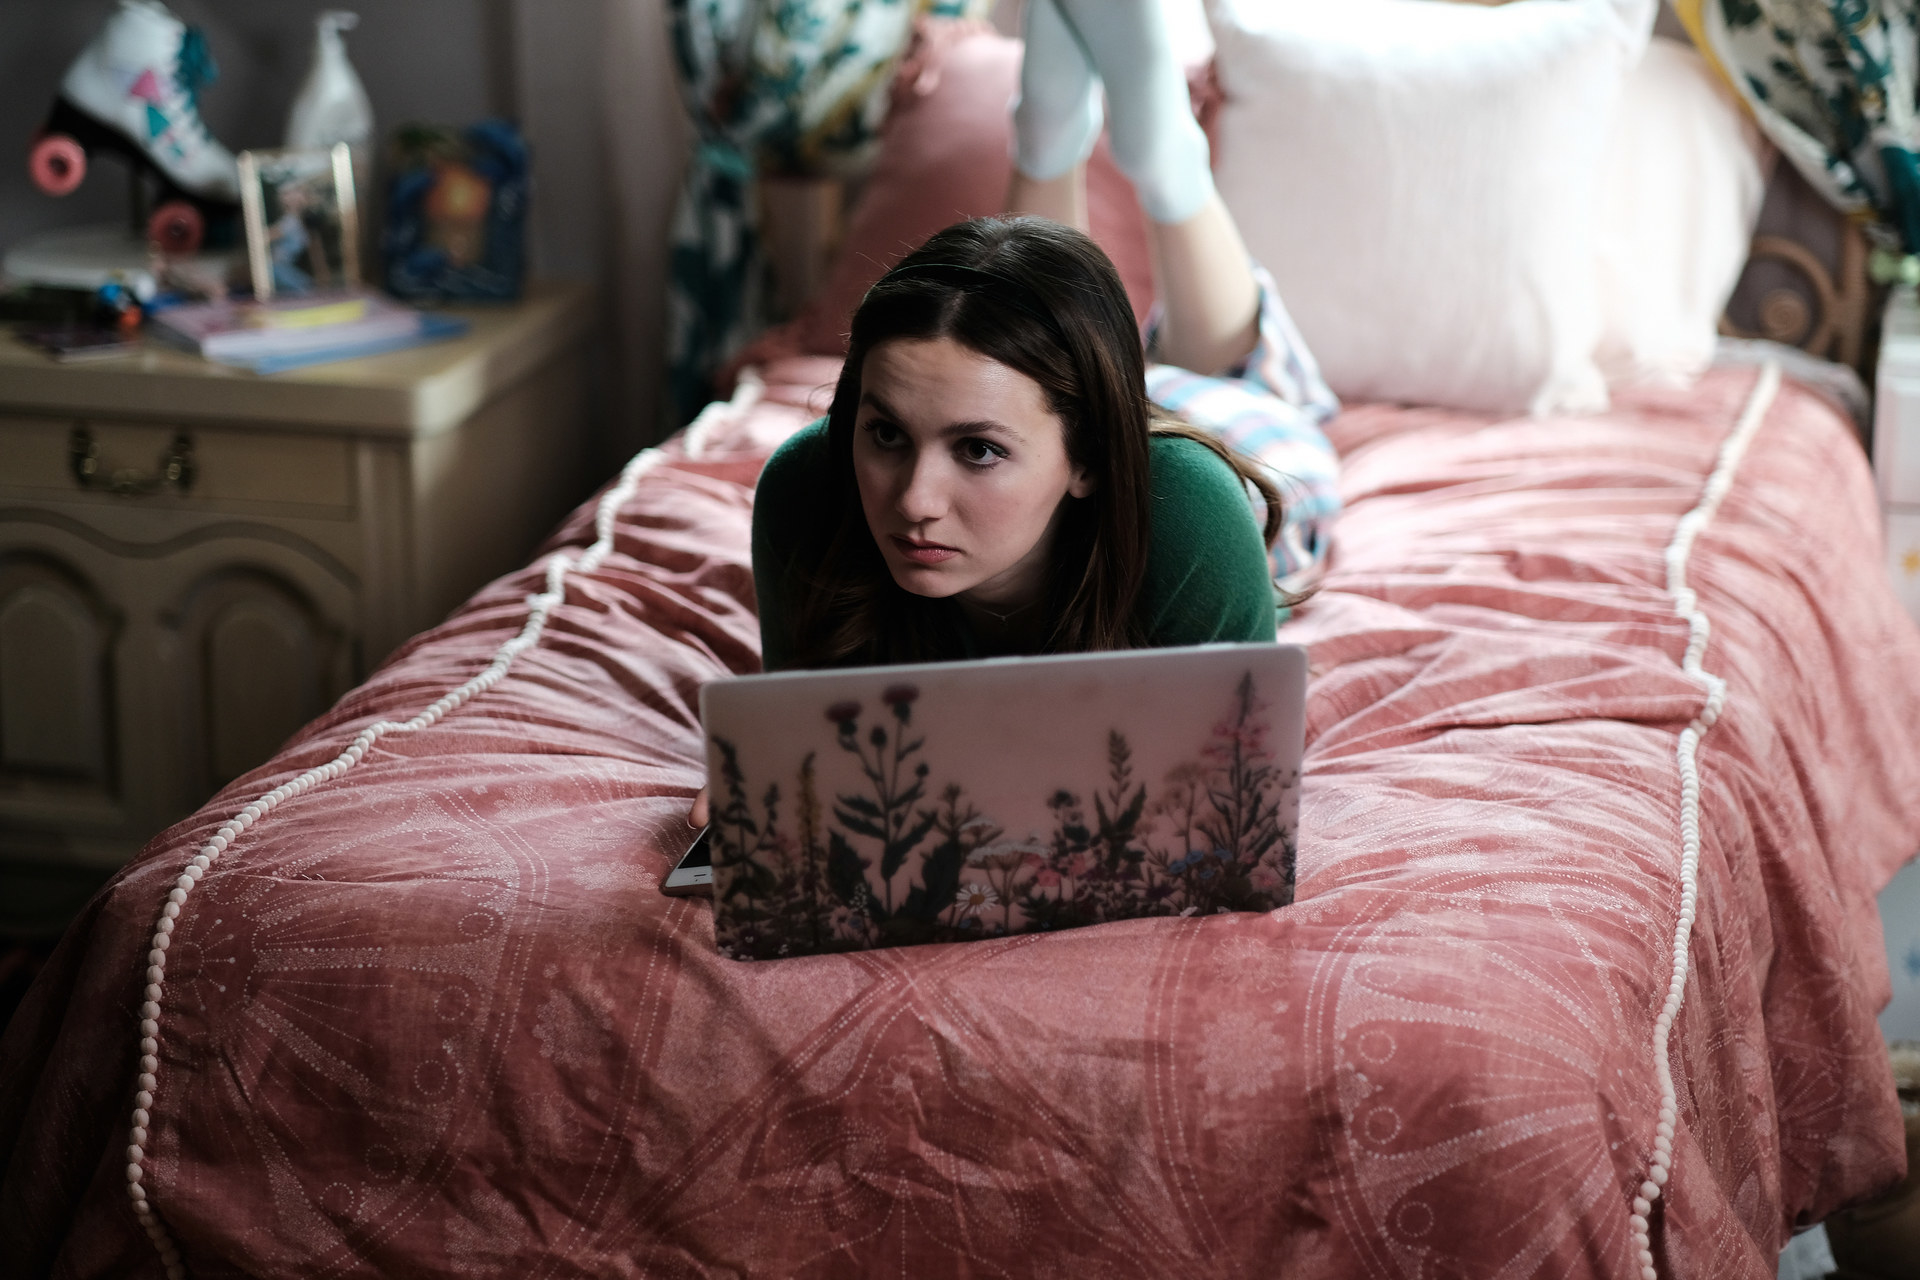 Teenage girl lying down on bed with her Macbook